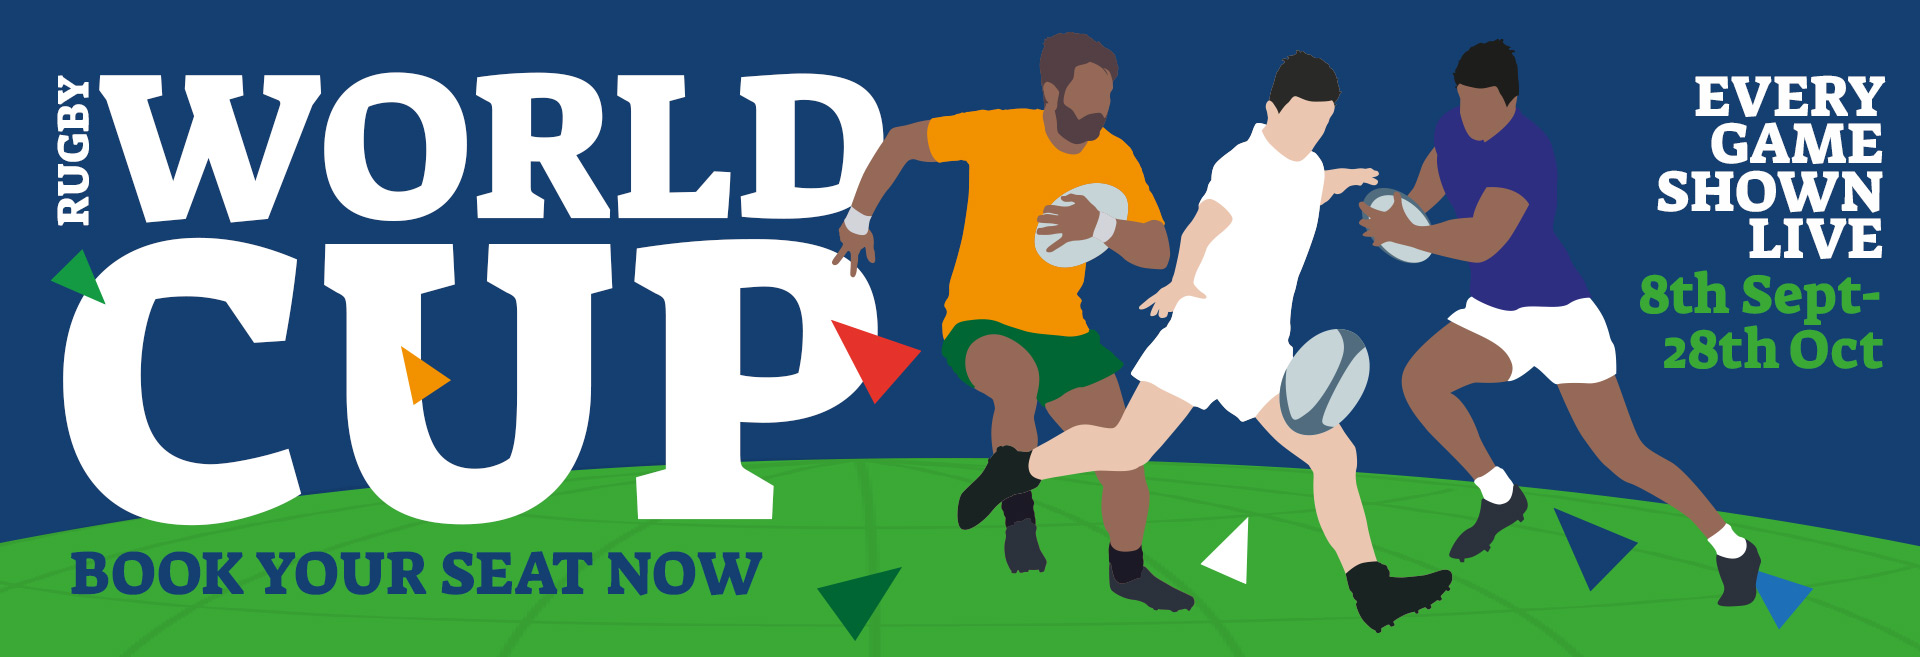 Watch the Rugby World Cup at The Angel Inn